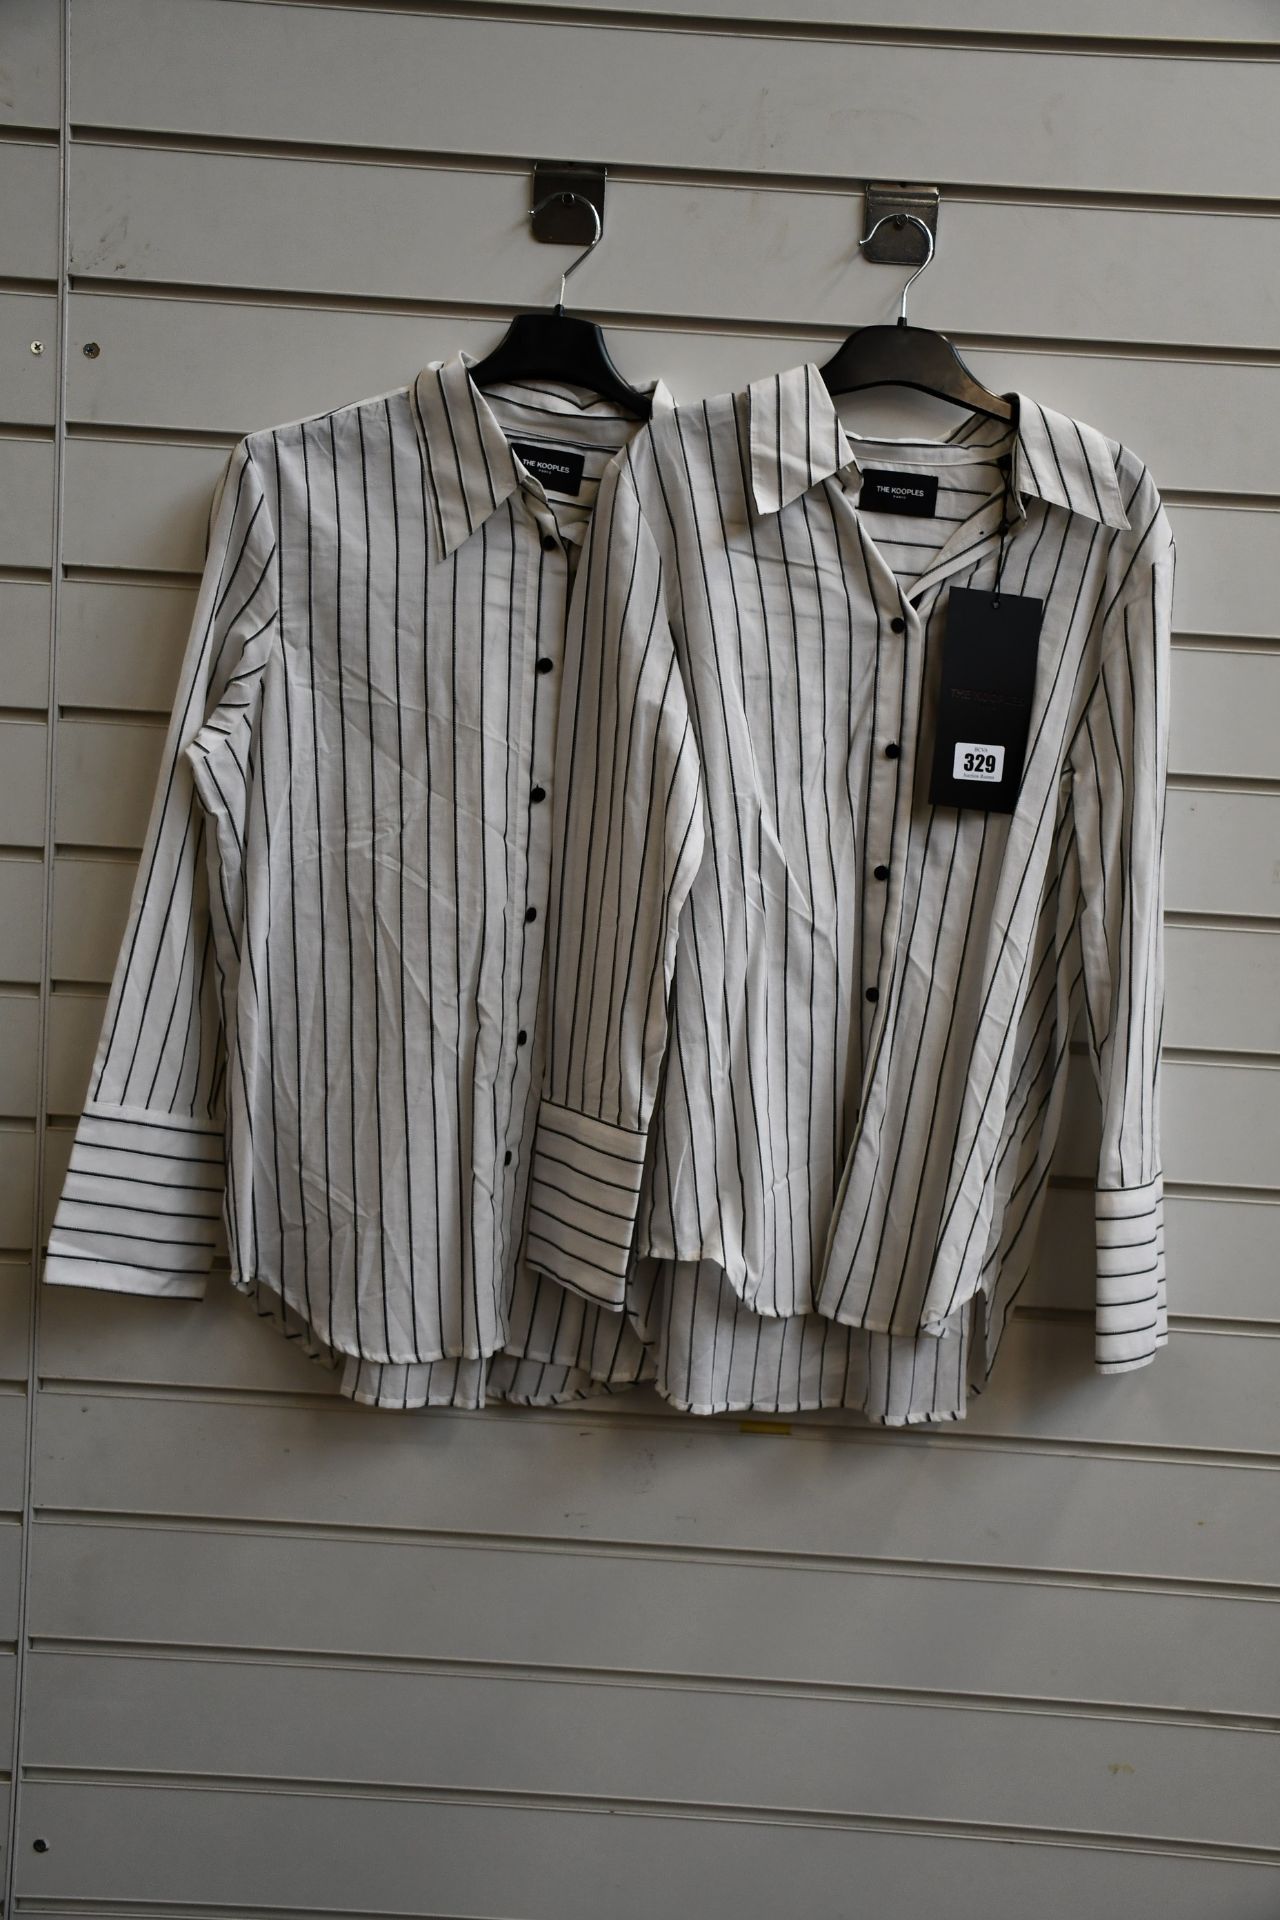 An as new The Kooples Sailing Stripes shirt (Size 0 RRP £135) and an as new The Kooples Sailing